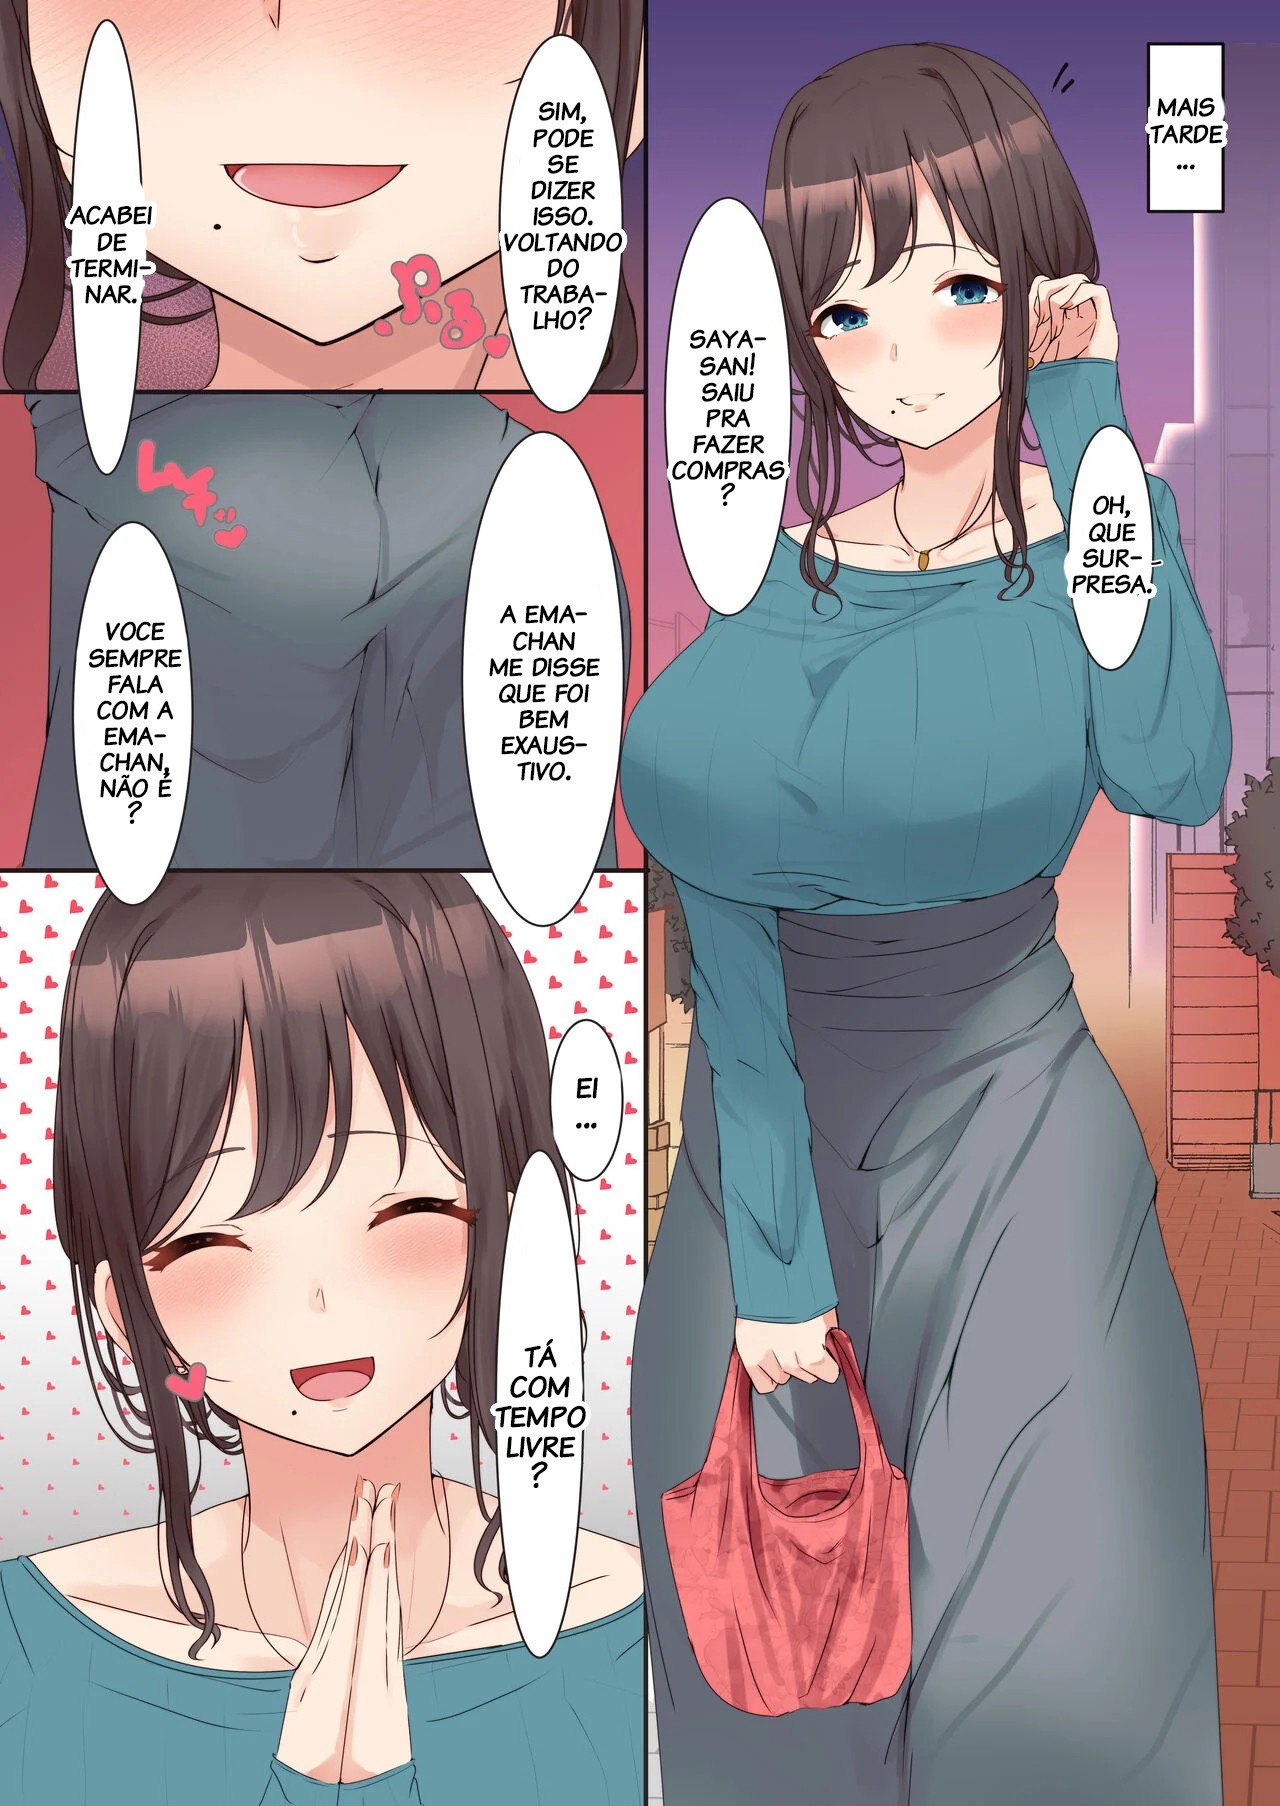 A Story About Being Wrung Out By An Onee-San And Gal Hentai pt-br 13